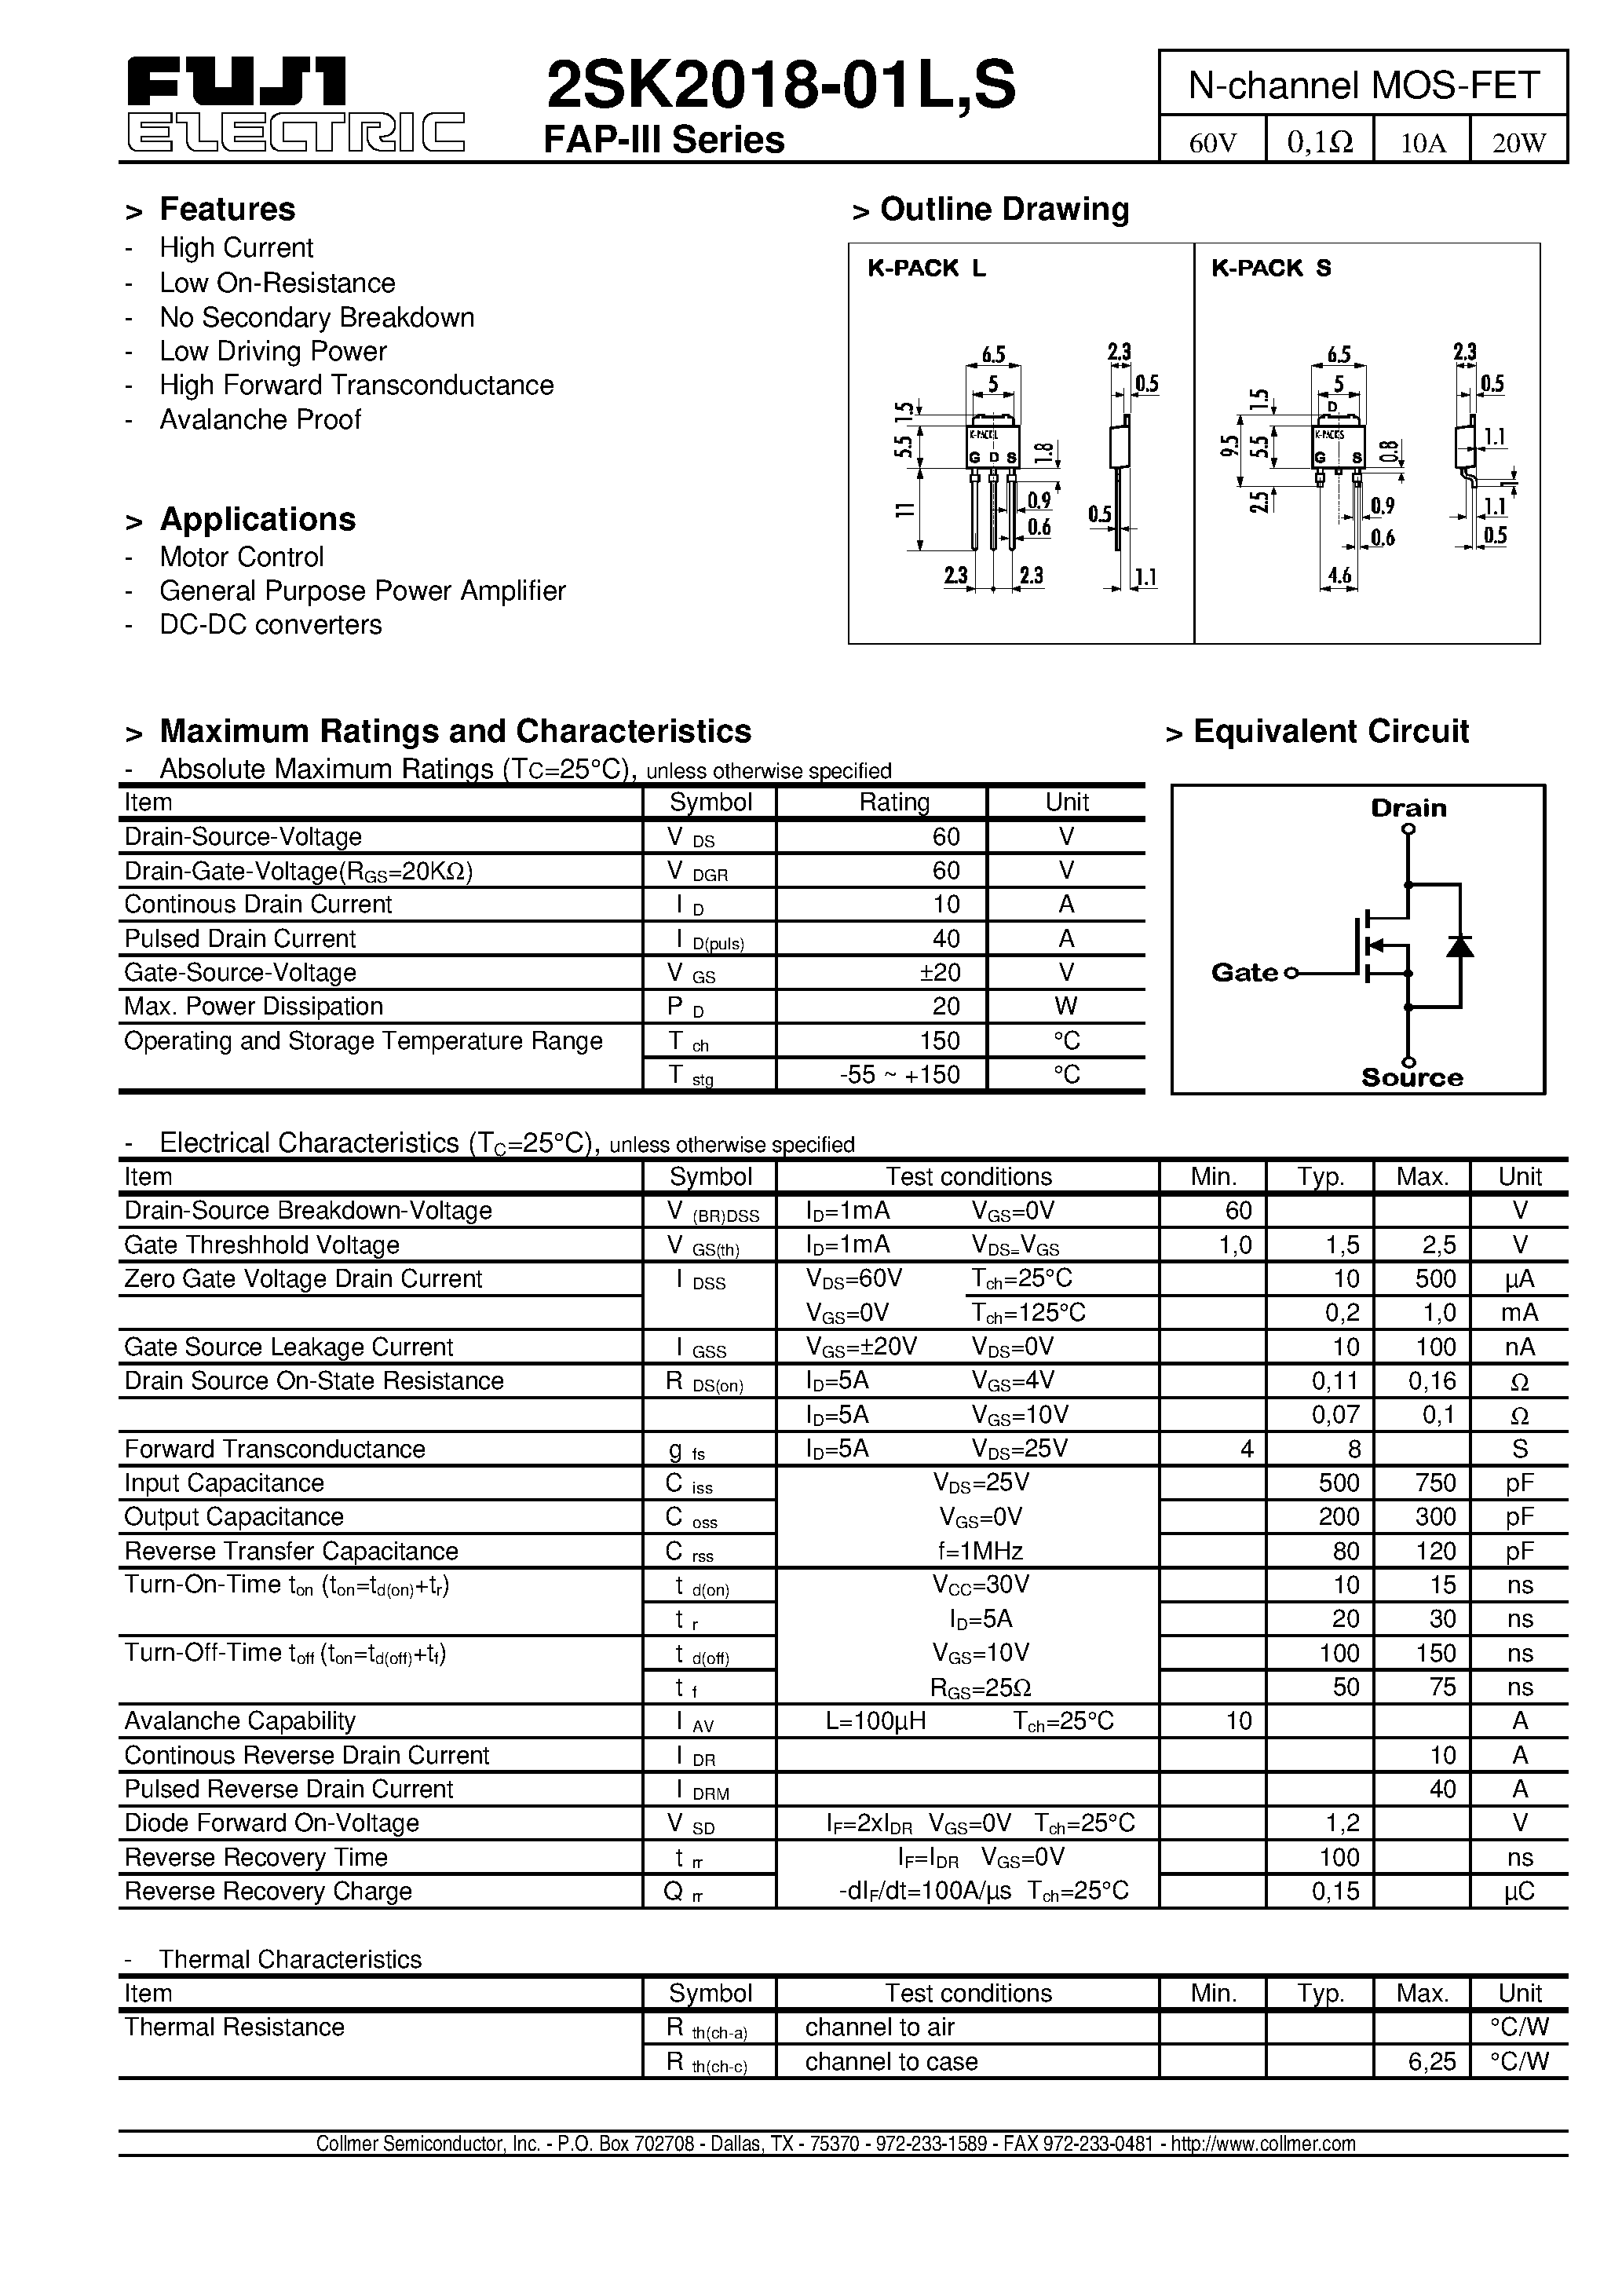 Datasheet 2SK2018-01L - N-channel MOS-FET page 1